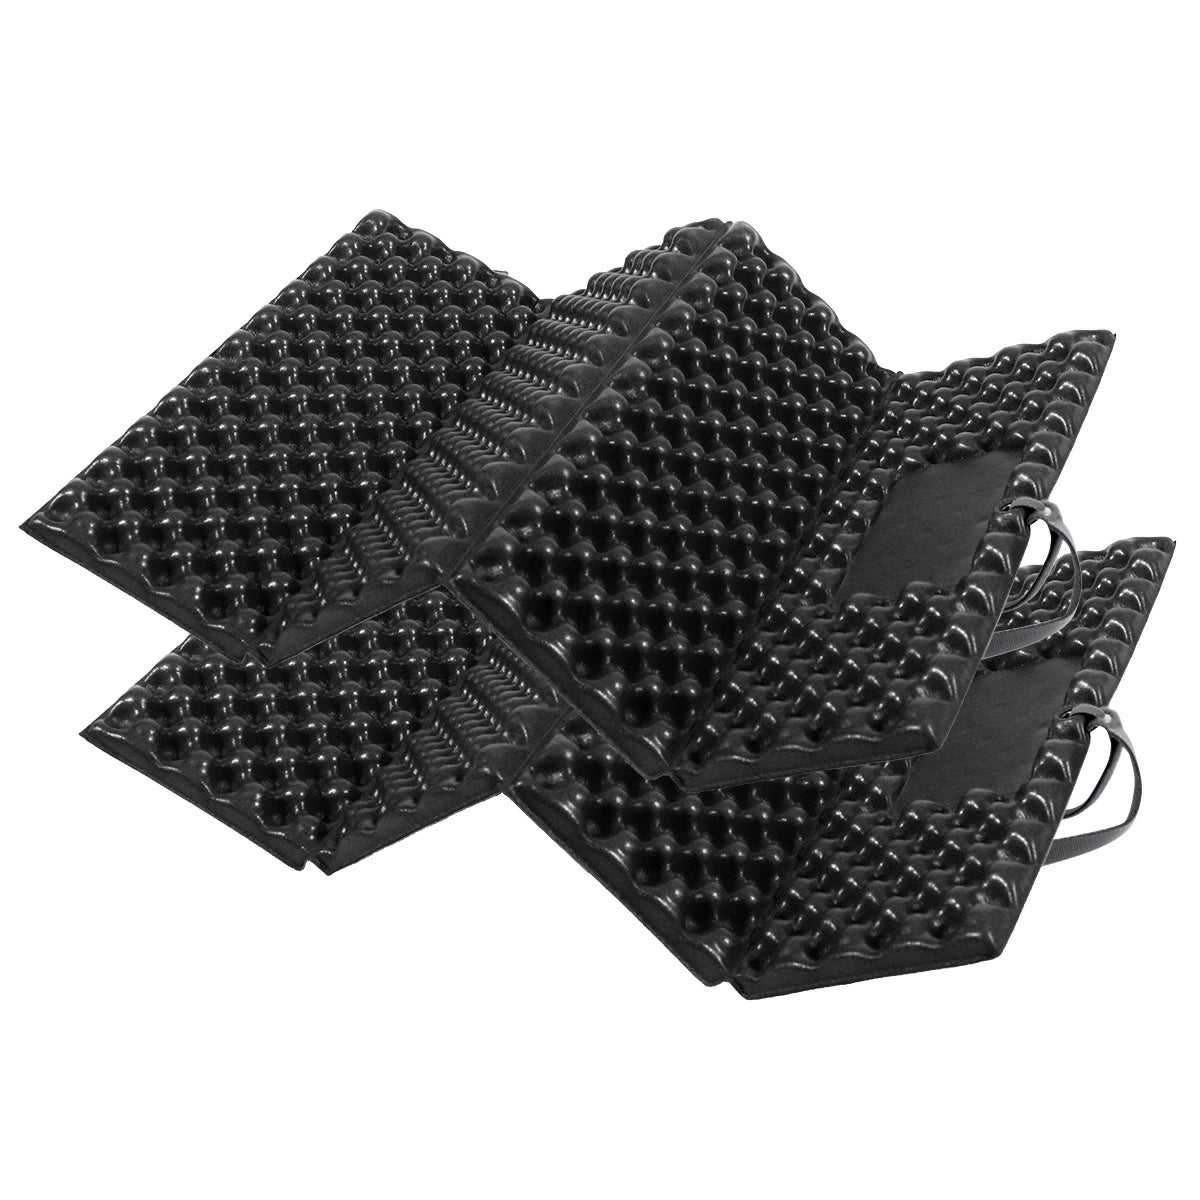 Ultralight Hiking Seat Pad for Outdoor Camping